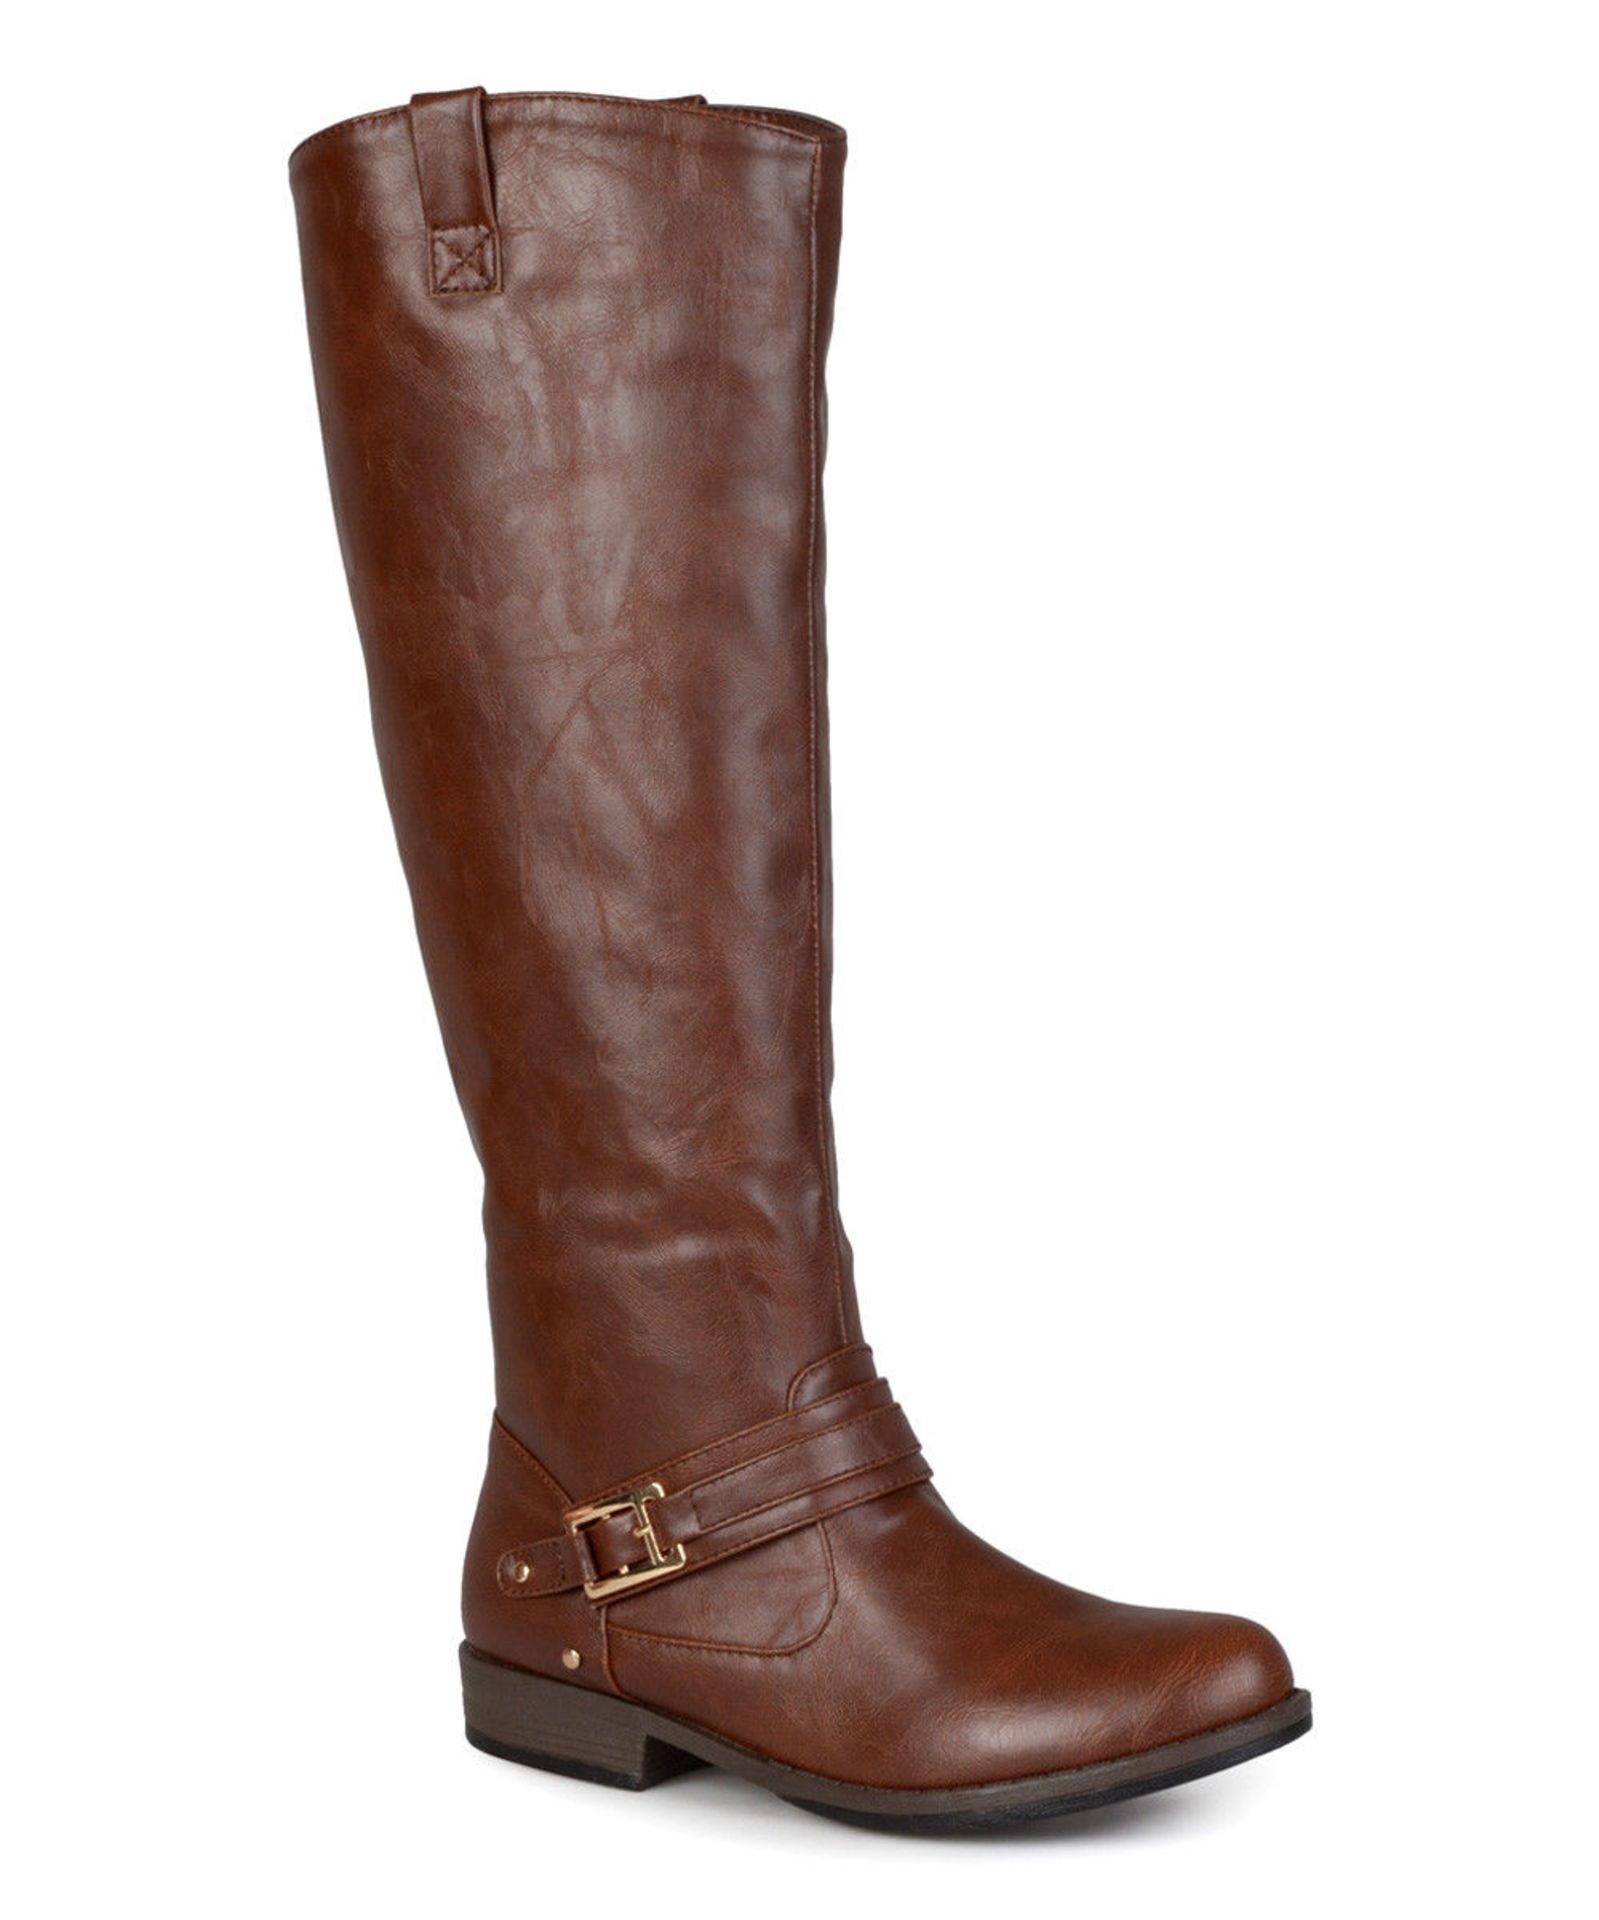 Journee Collection Brown Kai Boot (Uk Size 4.5:Us Size 7) (New with box) [Ref: 14251359-C-002]